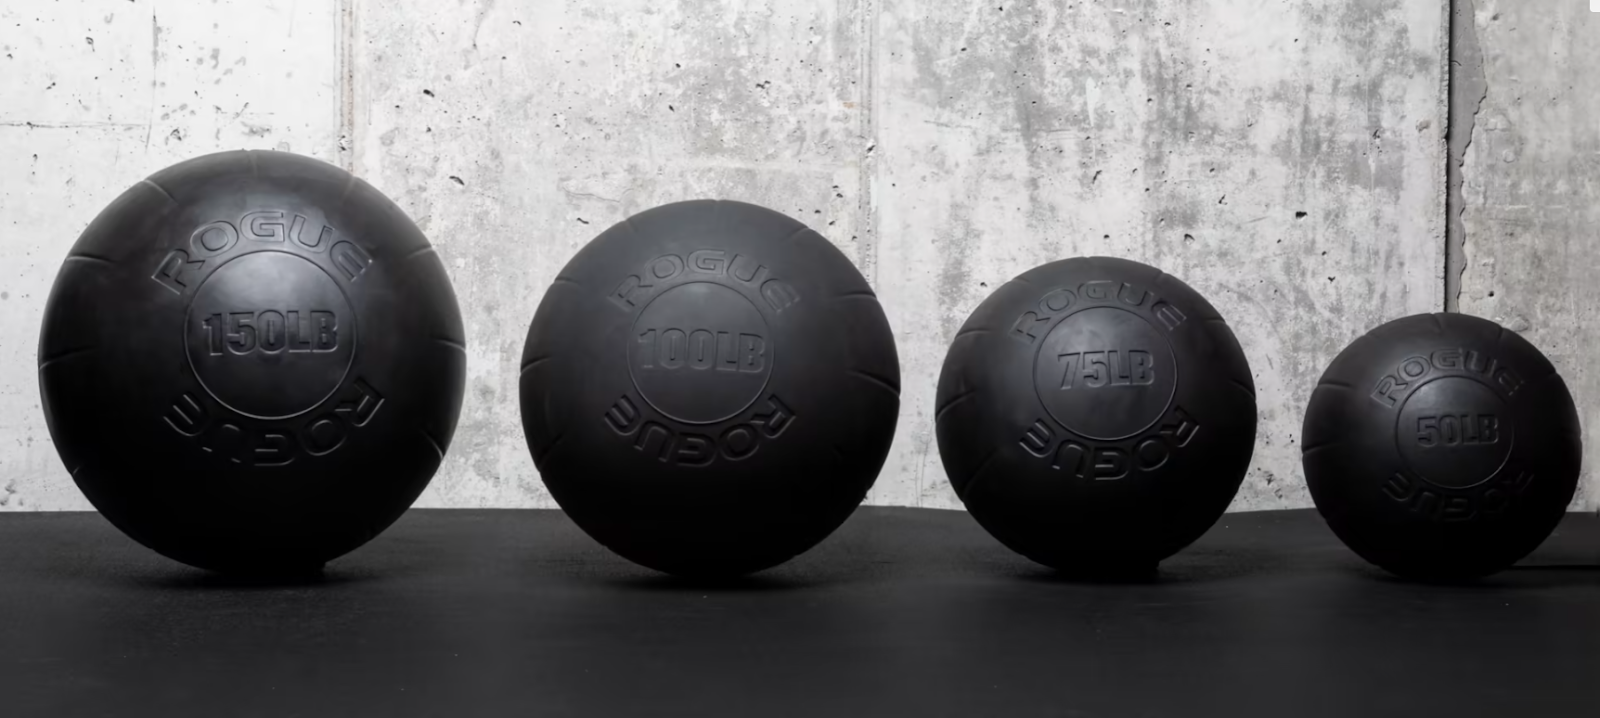 An overview of the Rogue Fitness rubber atlas stones. Stones of 150lbs, 100lbs, 75lbs and 50lbs are shown.